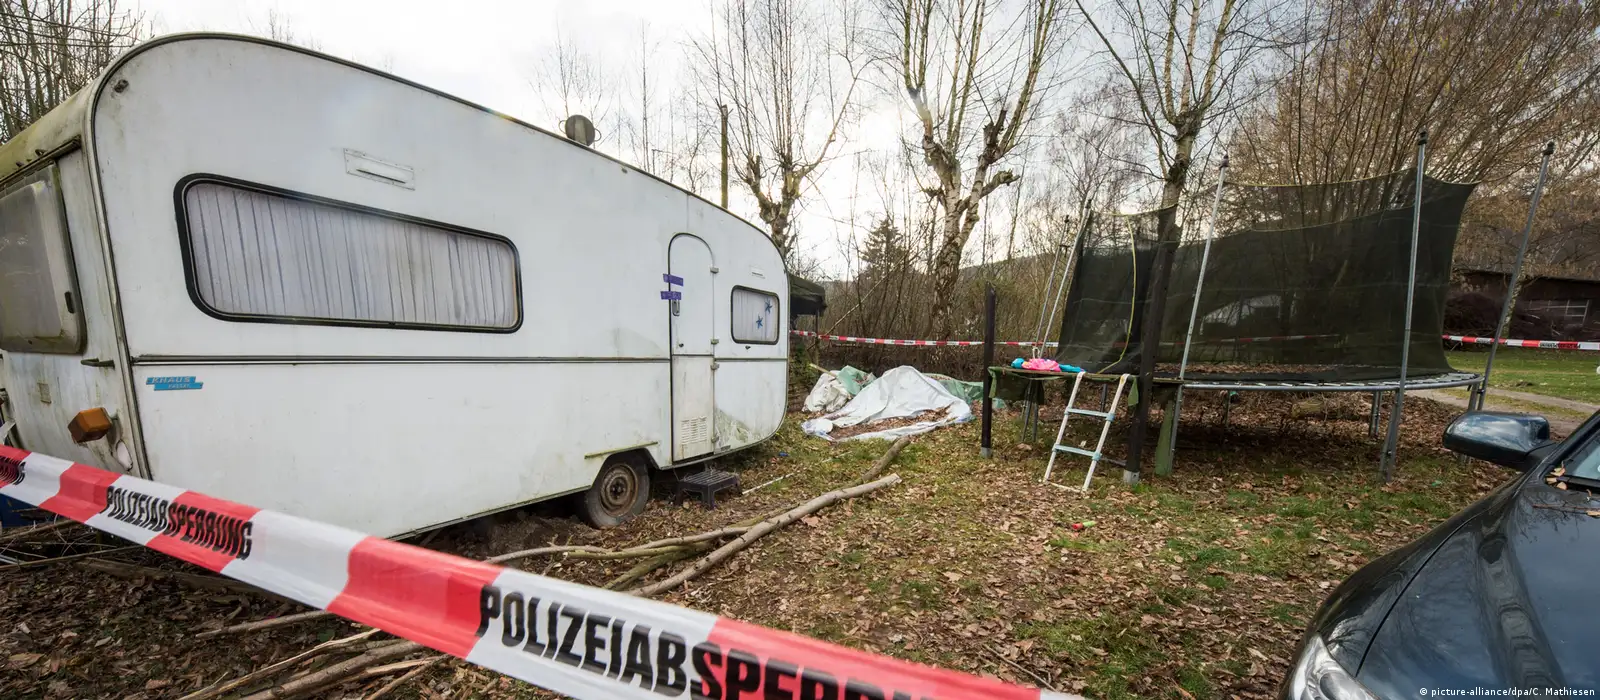 Smallgarlssex - Child abuse at campsite: How authorities failed the victims â€“ DW â€“  09/05/2019